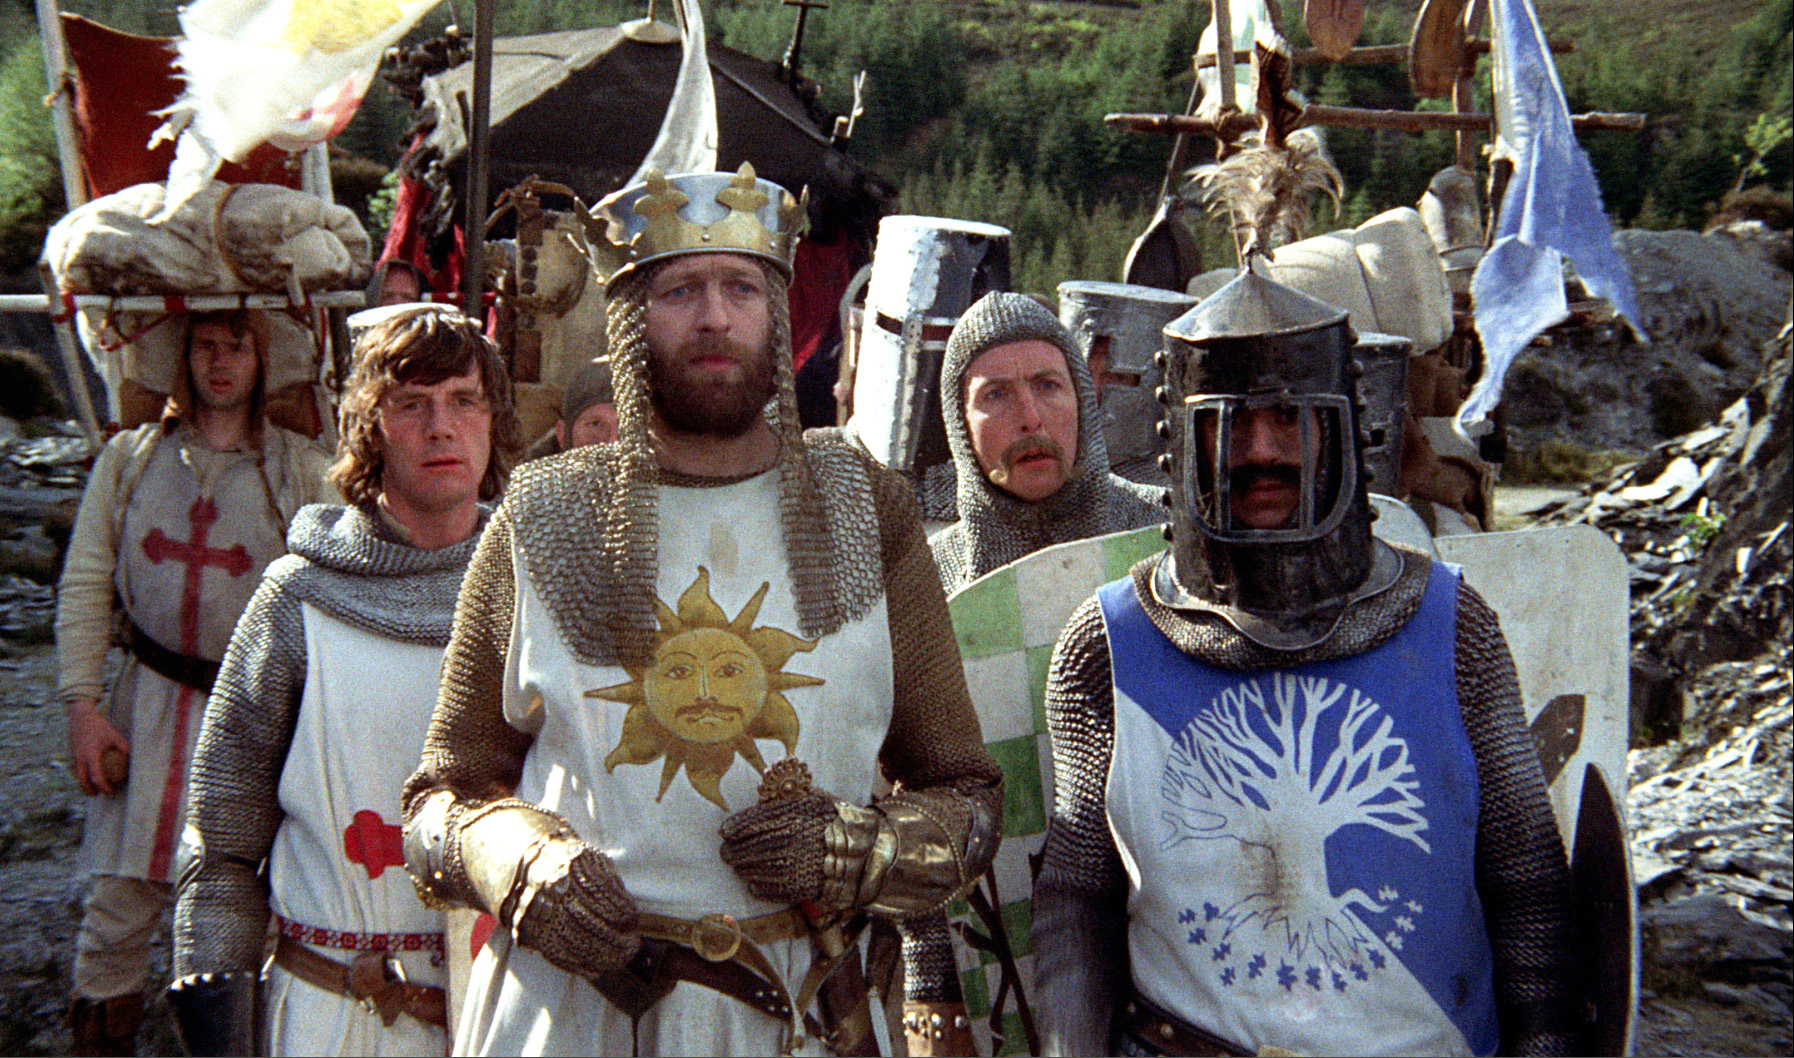 1794x1058px Monty Python And The Holy Grail 1079.04 KB